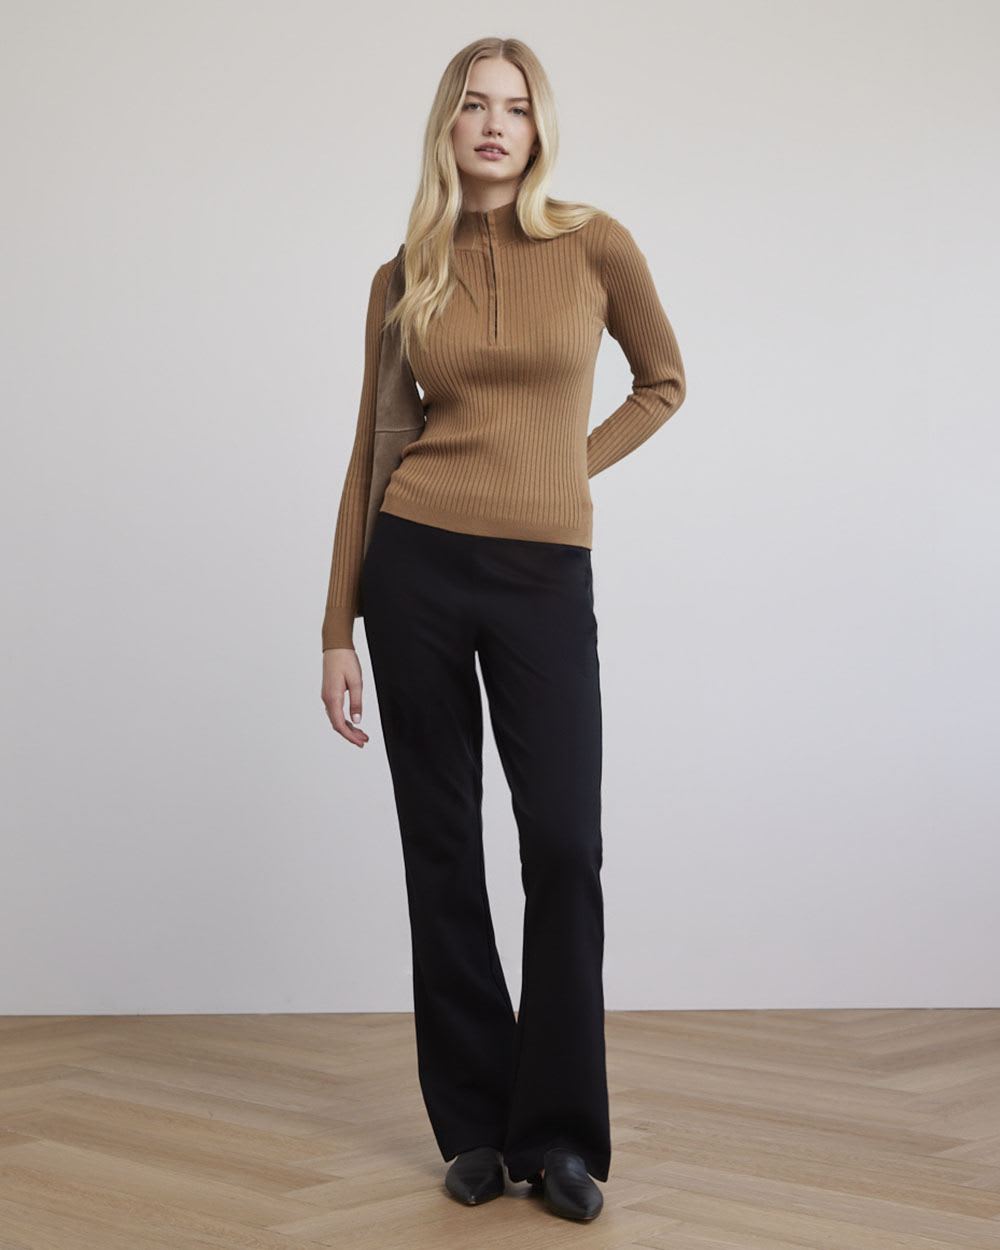 Long-Sleeve Textured Bodycon Sweater with Mock Neckline